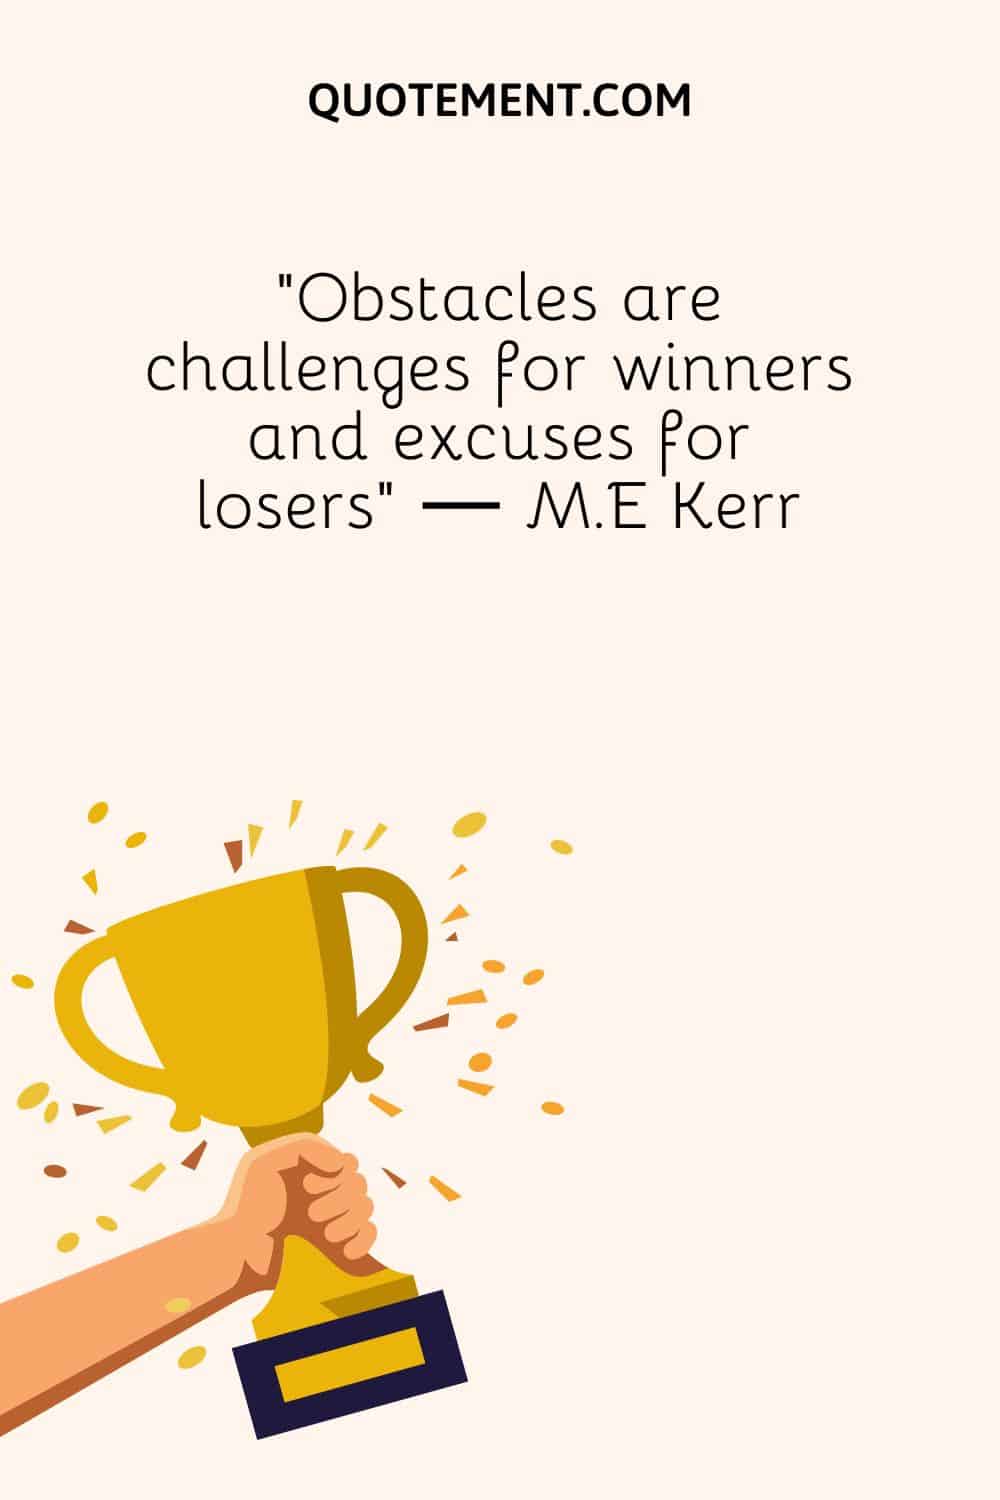 “Obstacles are challenges for winners and excuses for losers” ― M.E Kerr